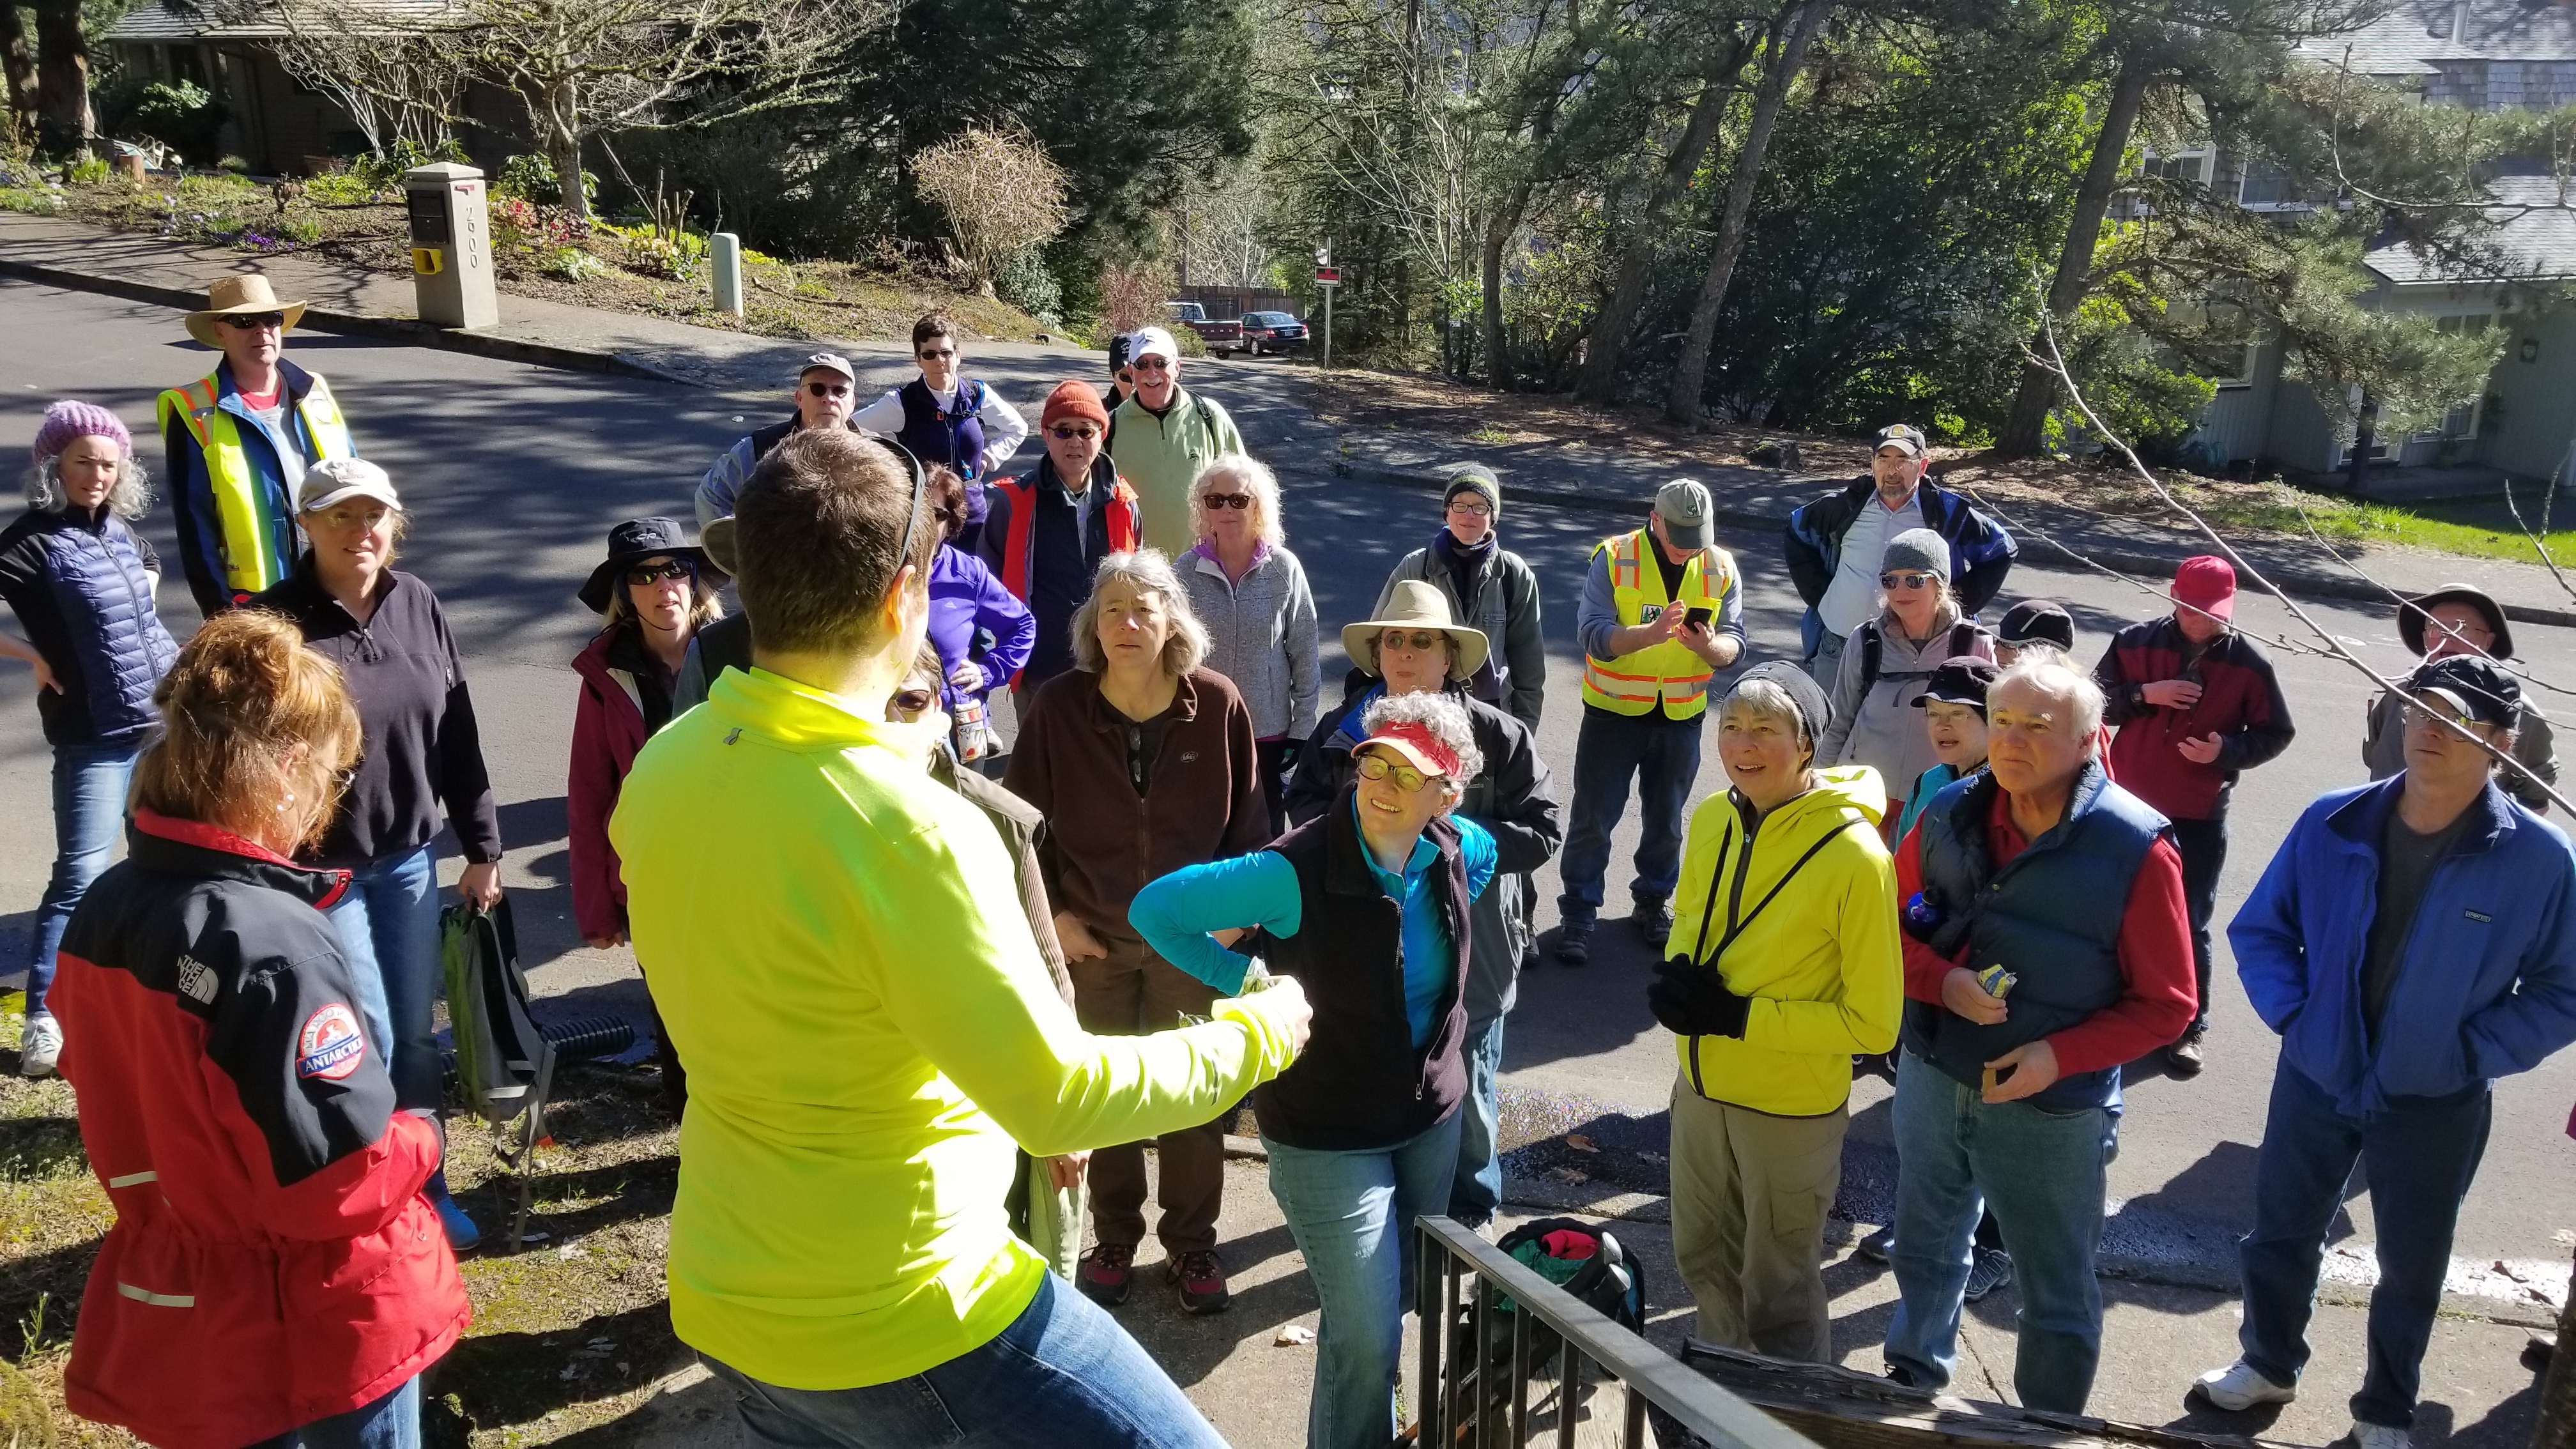 Rick Kappler told the SW Trails hiking group about the history of the stairs.